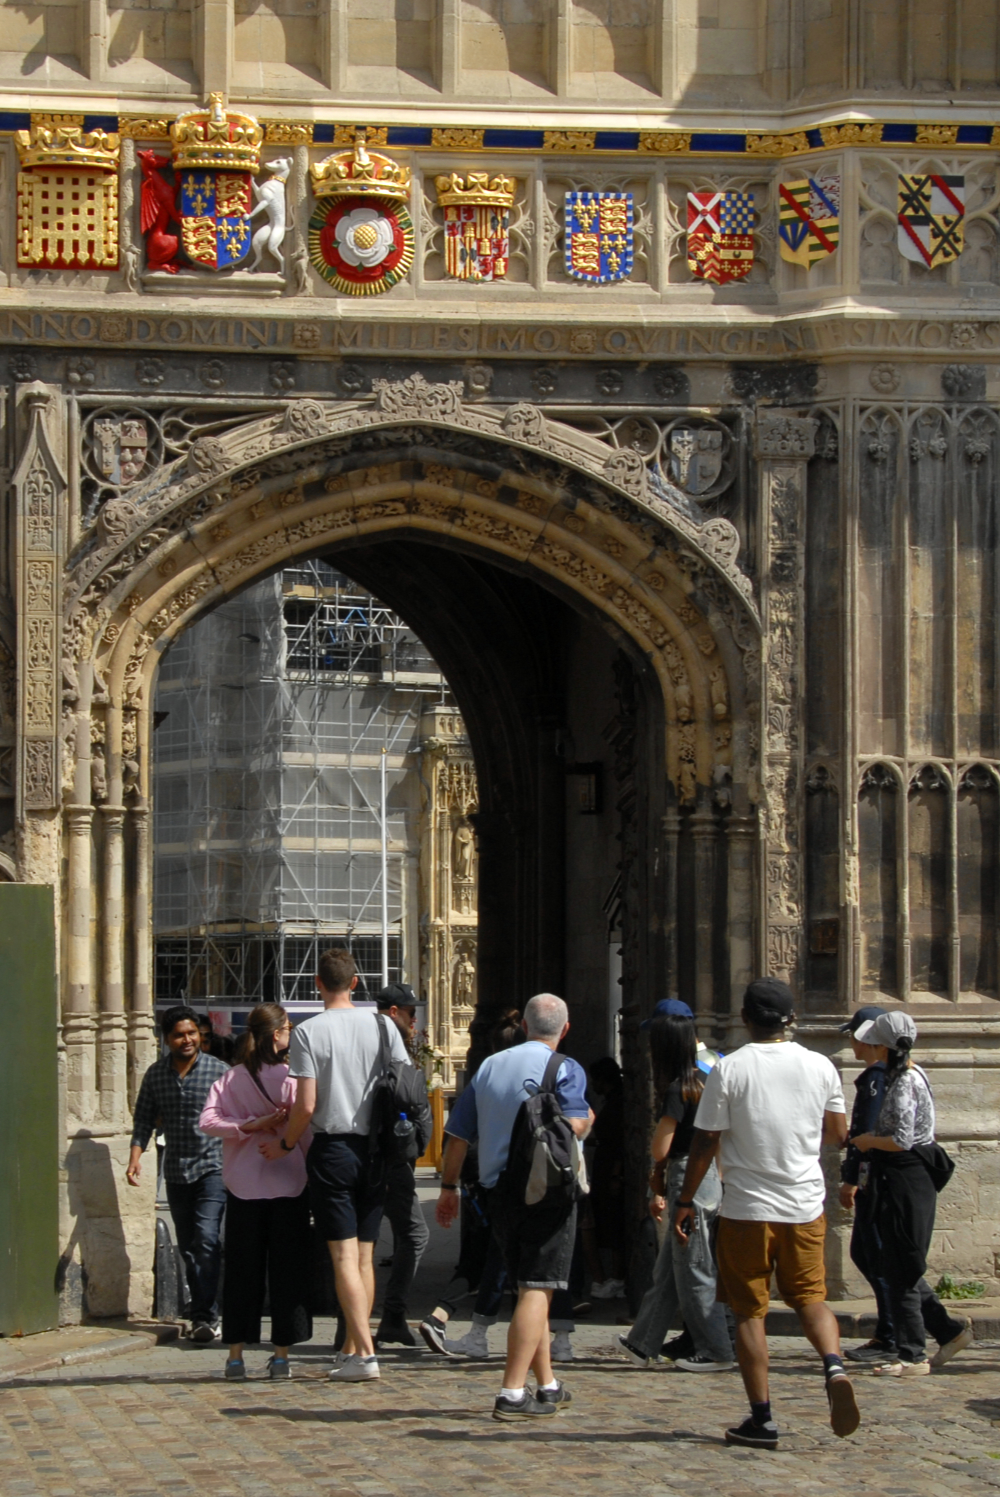 Entering Canterbury Cathedral Grounds by David Grimwade